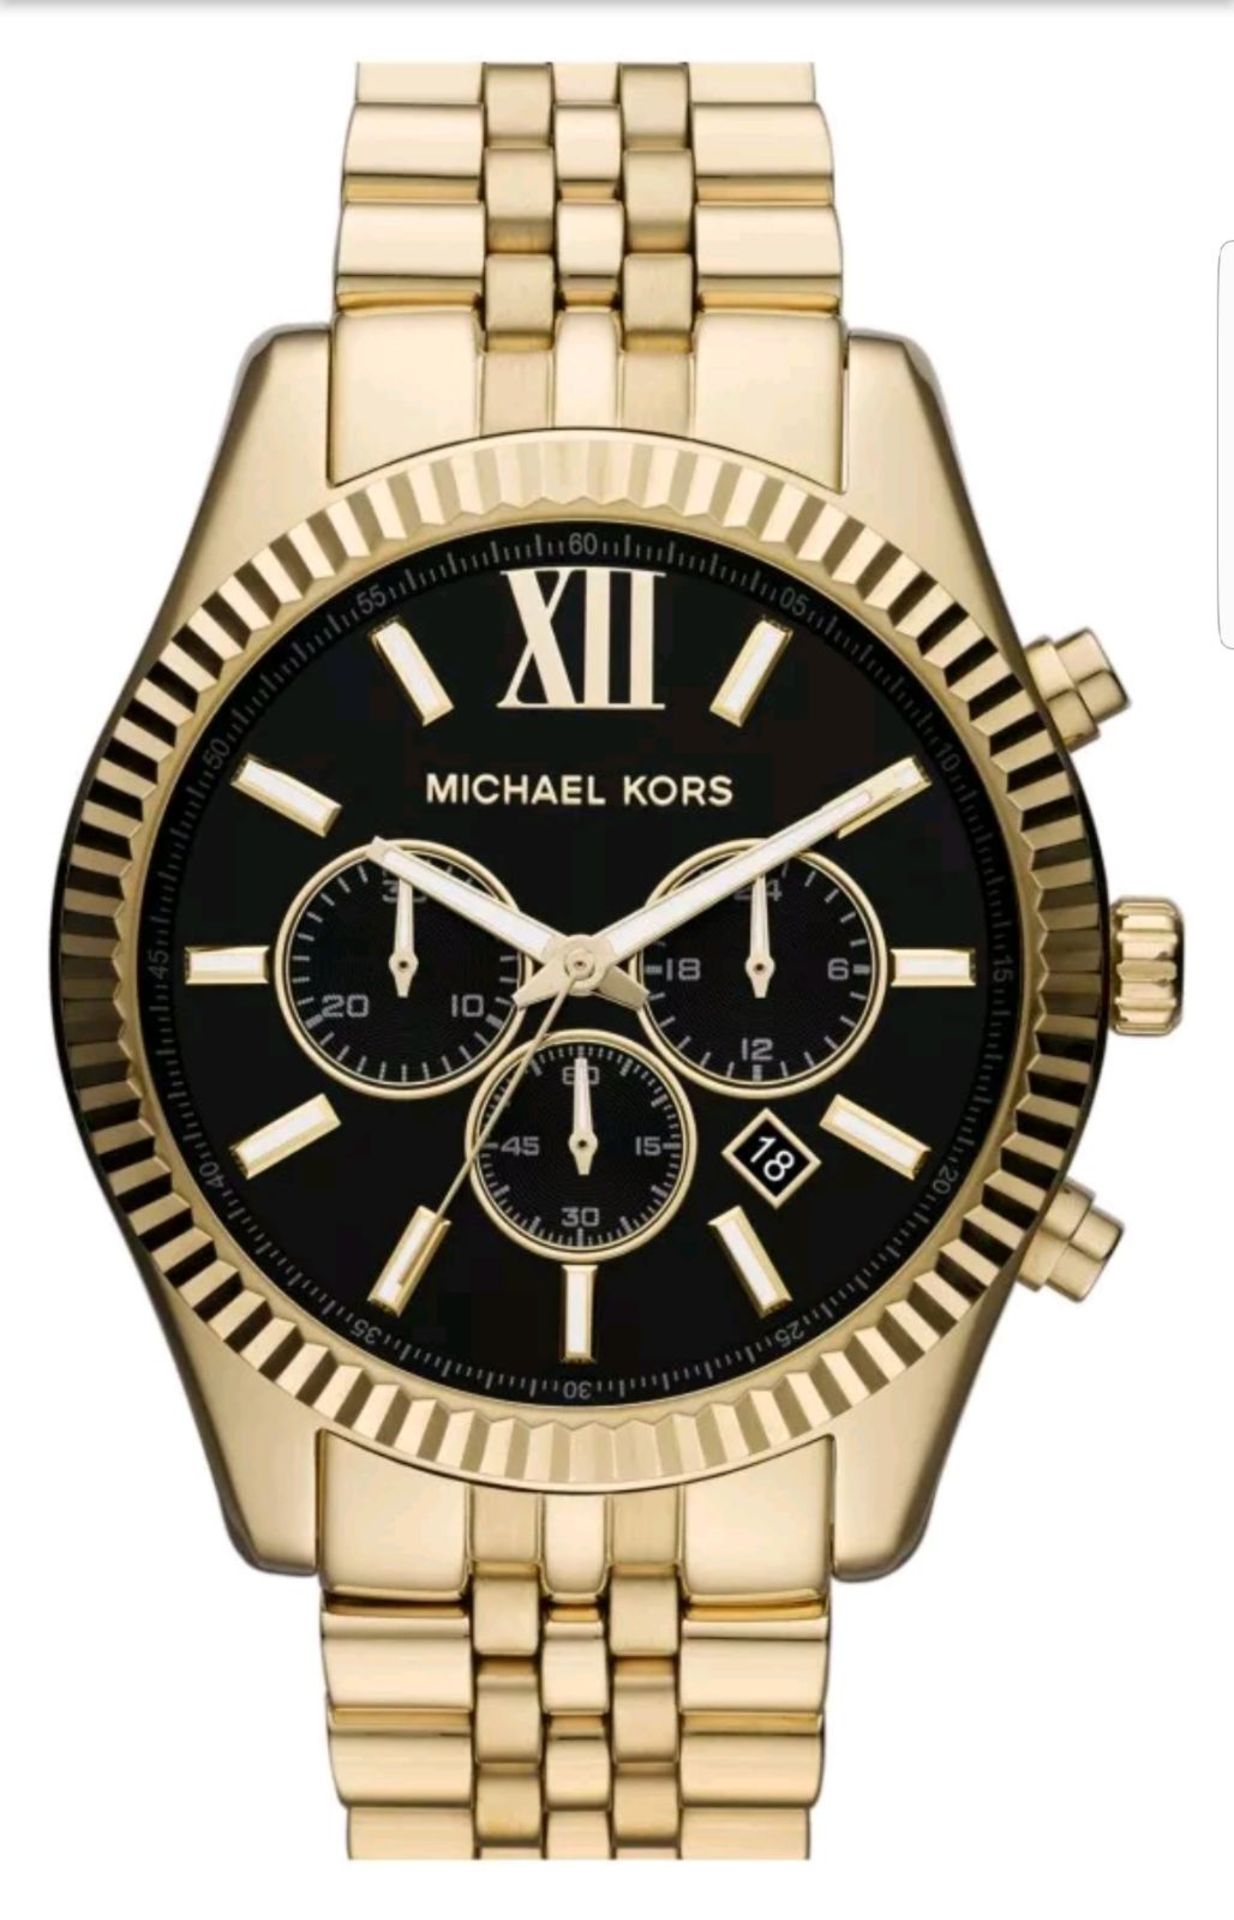 BRAND NEW GENTS MICHAEL KORS MK8286, COMPLETE WITH ORIGINAL PACKAGING AND MANUAL